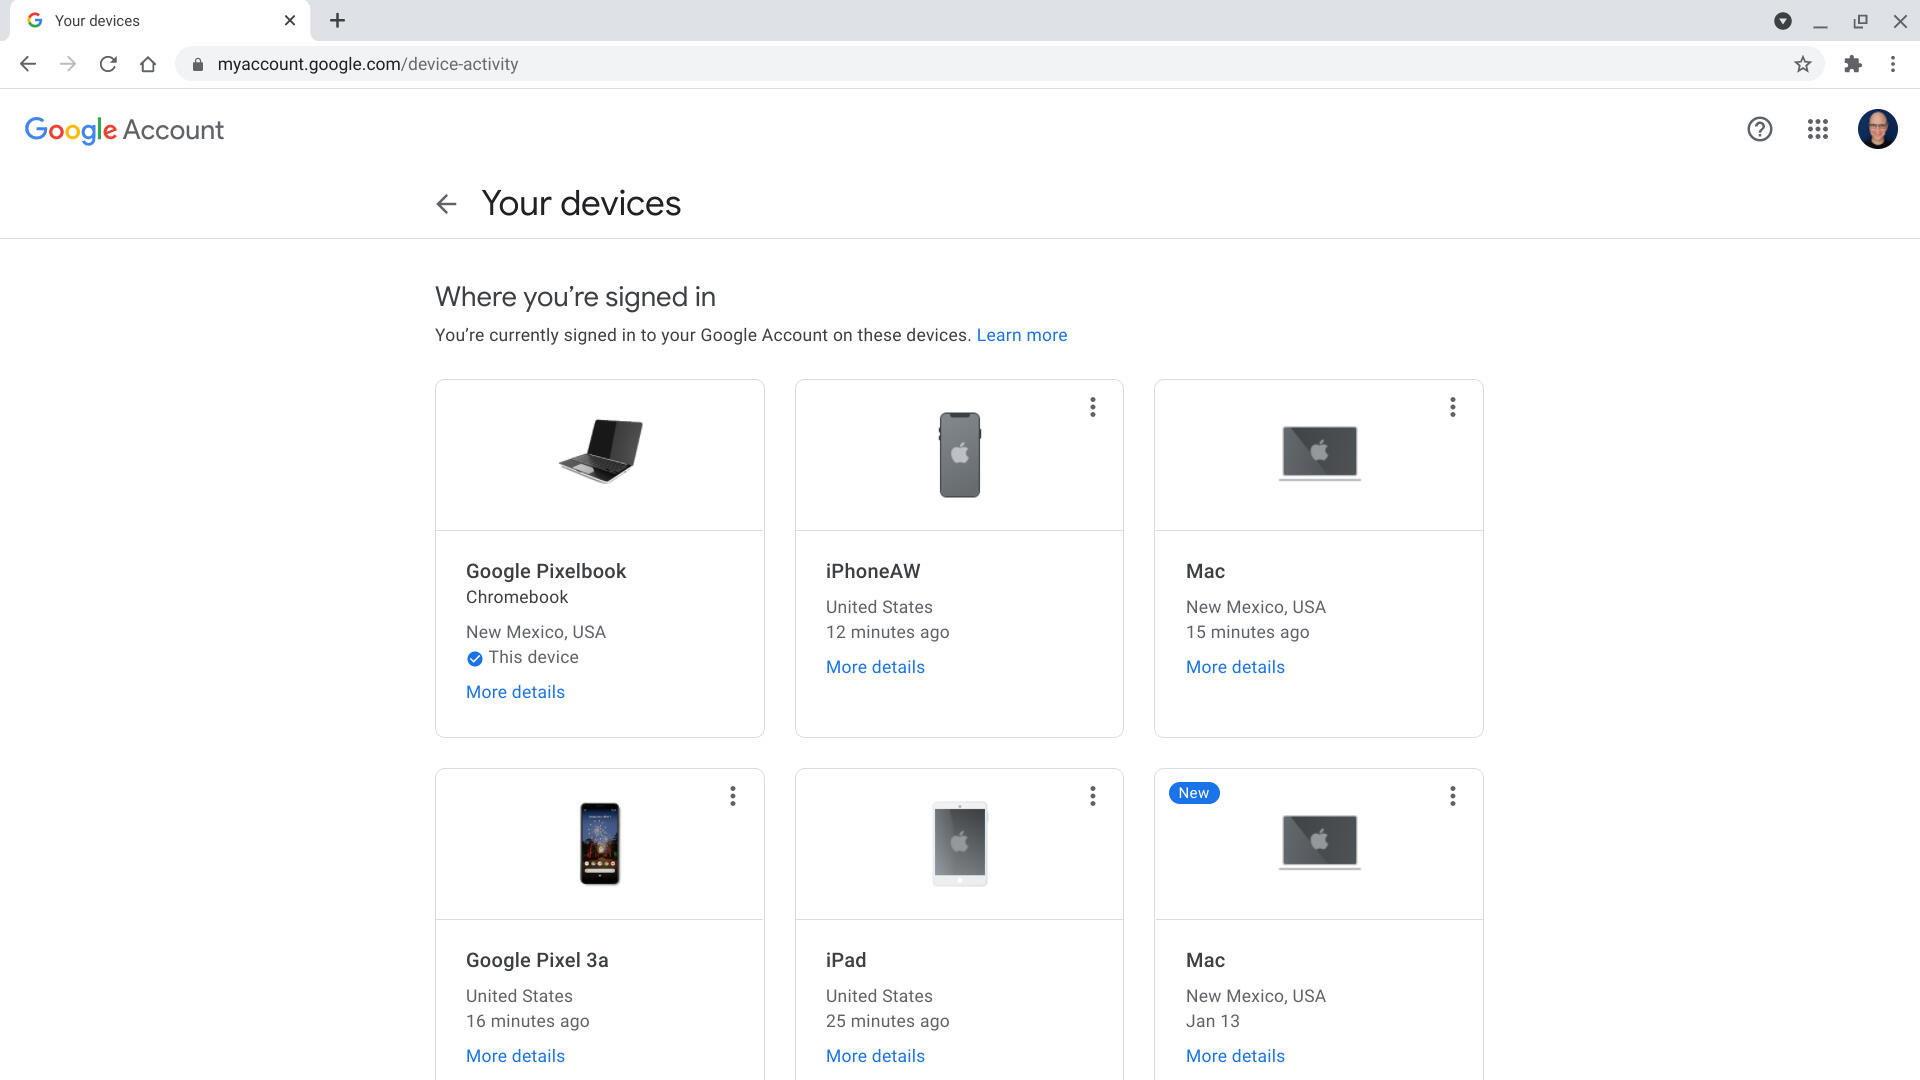 Screenshot shows "Your devices" with 6 different items: Pixelbook, iPhone, Android phone, iPad, and 2 macOS laptops, with recent activity dates also displayed.